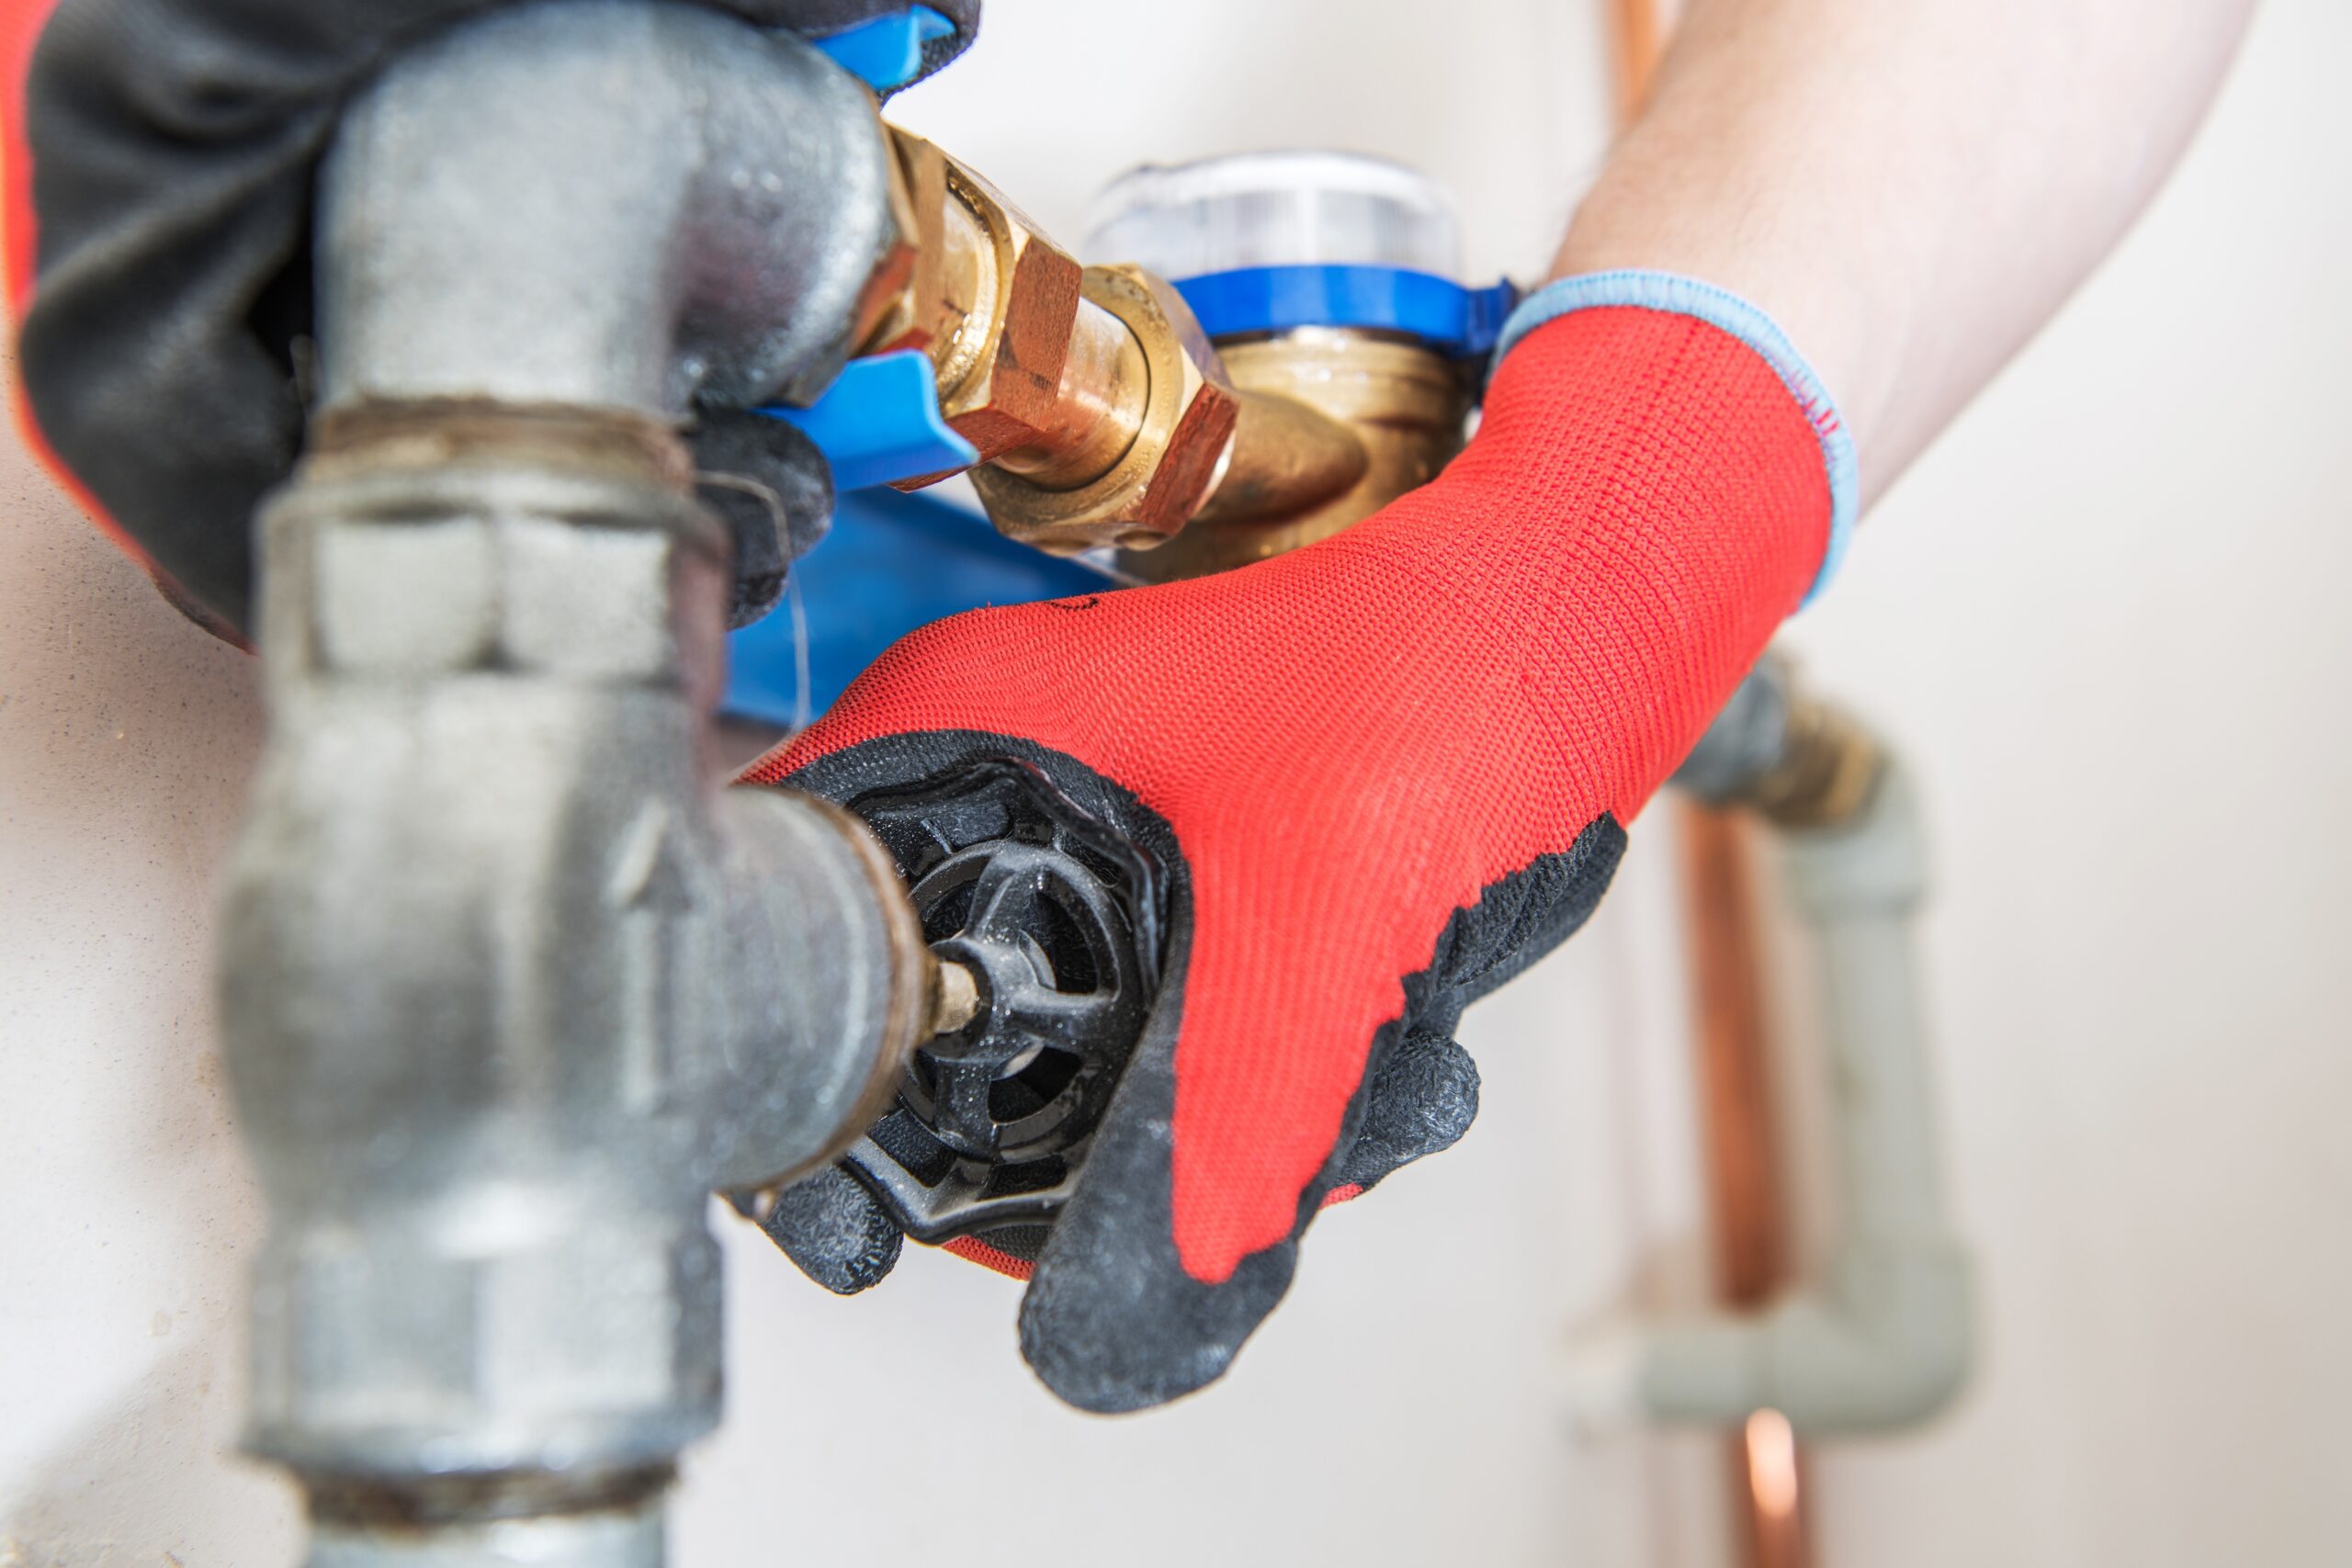 Read more about the article Plumbing inspection checklist: what to look for when inspecting your homes plumbing